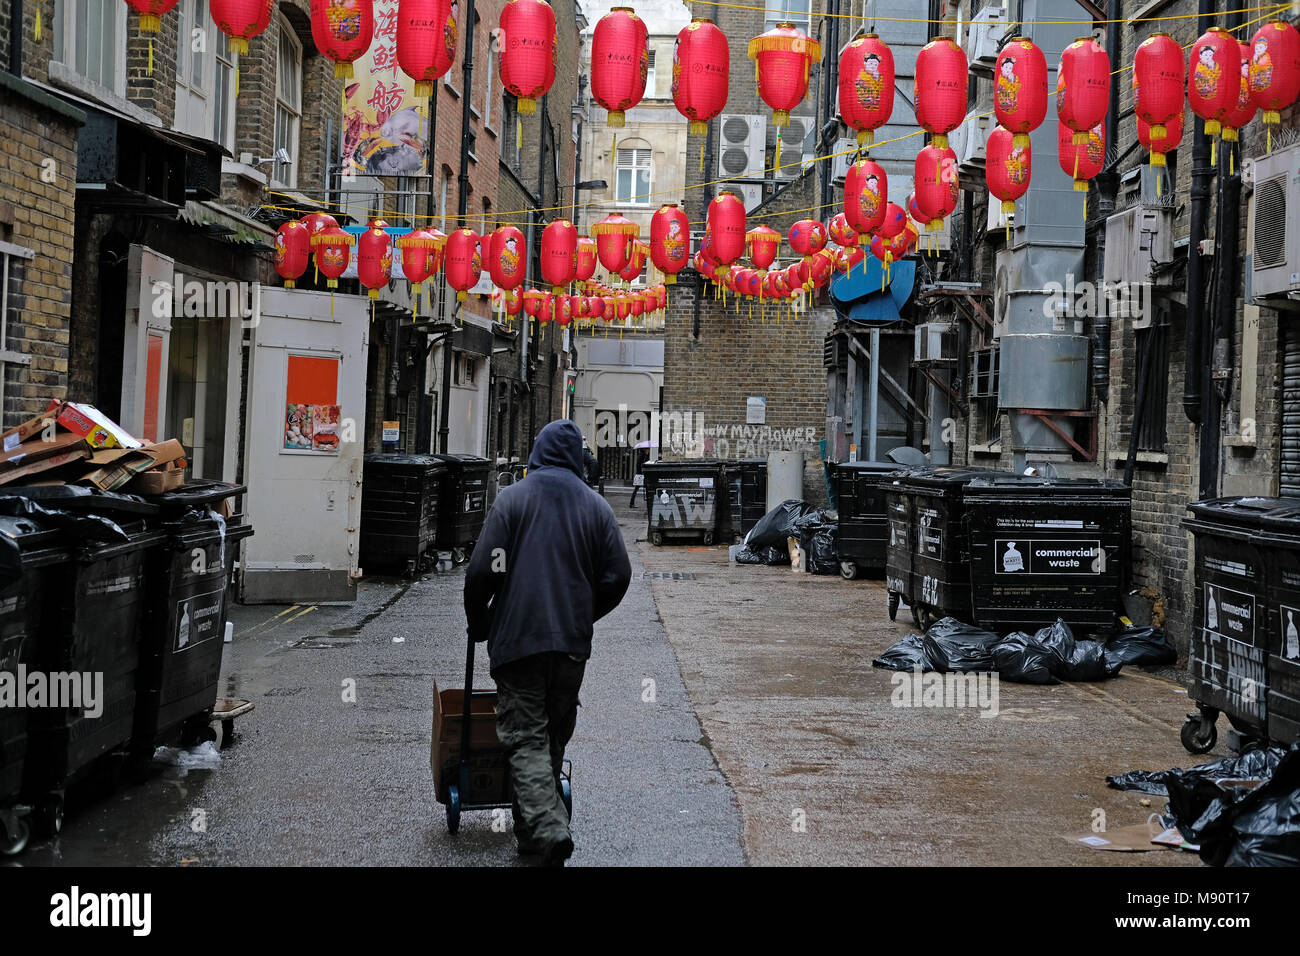 Delivery in the backstreets of Chinatown in London Stock Photo